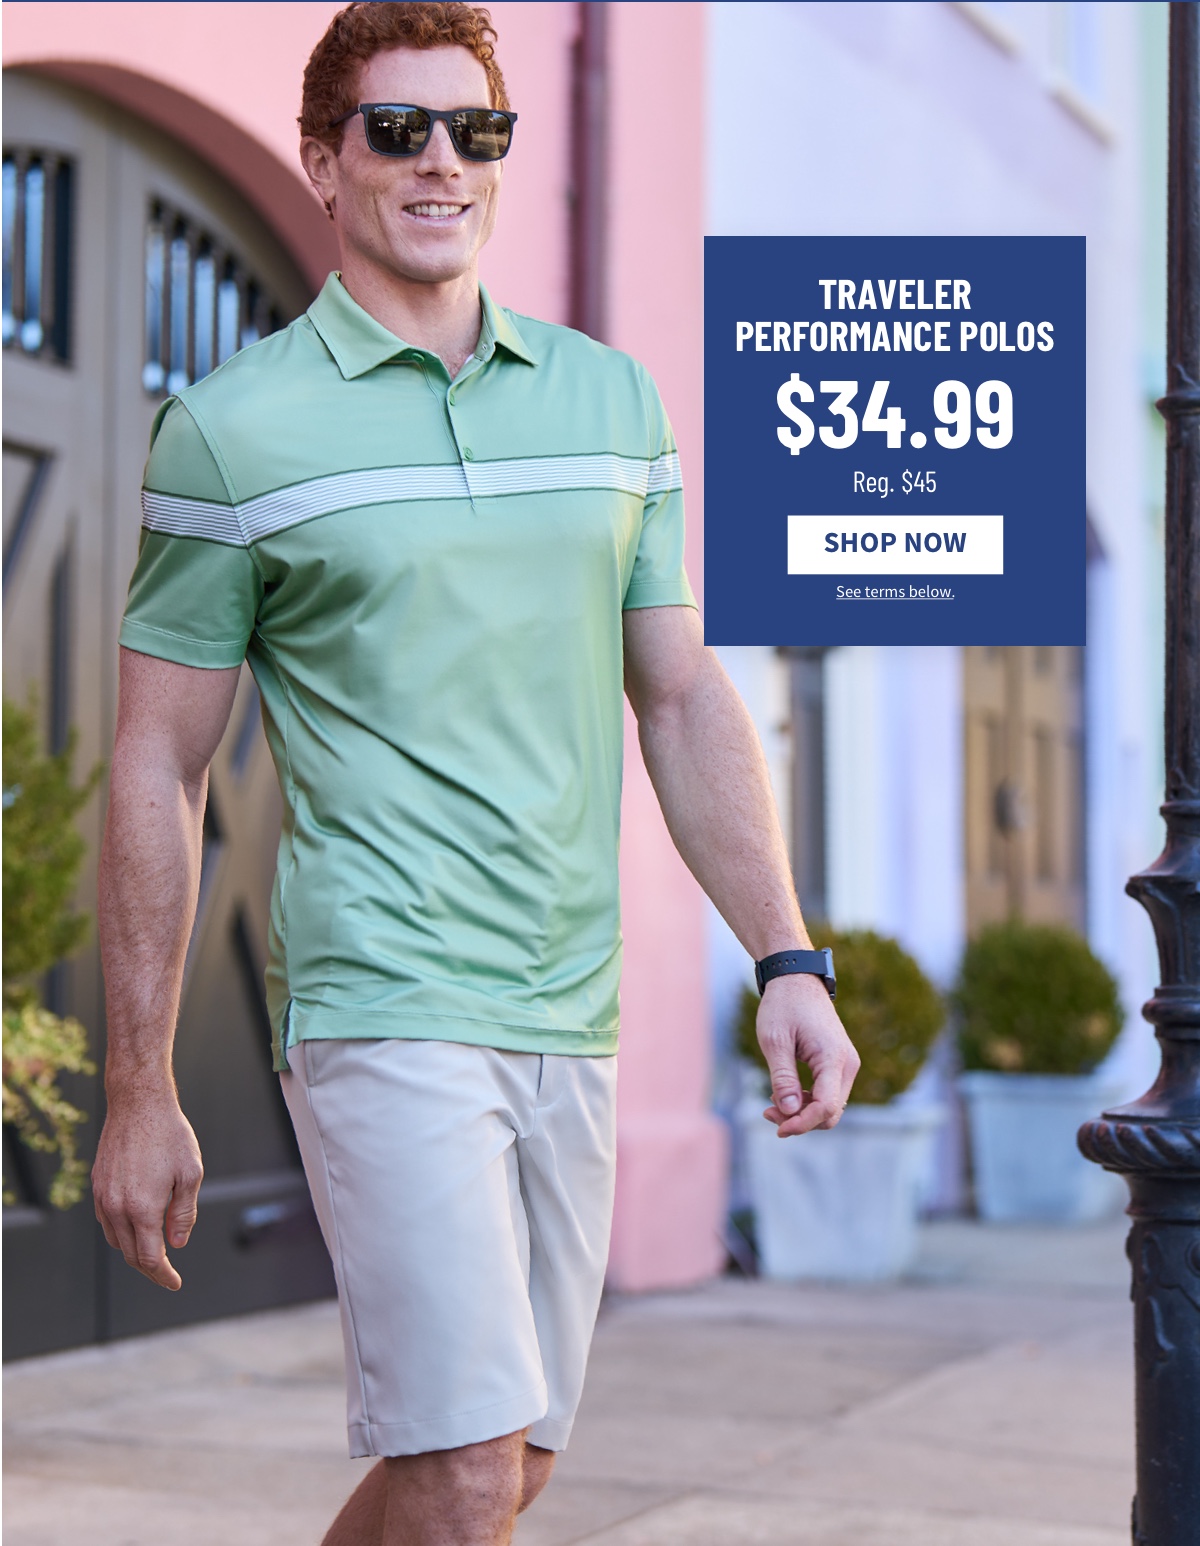 Traveler Performance Polos $34.99 Reg. $45 Shop Now See terms below.